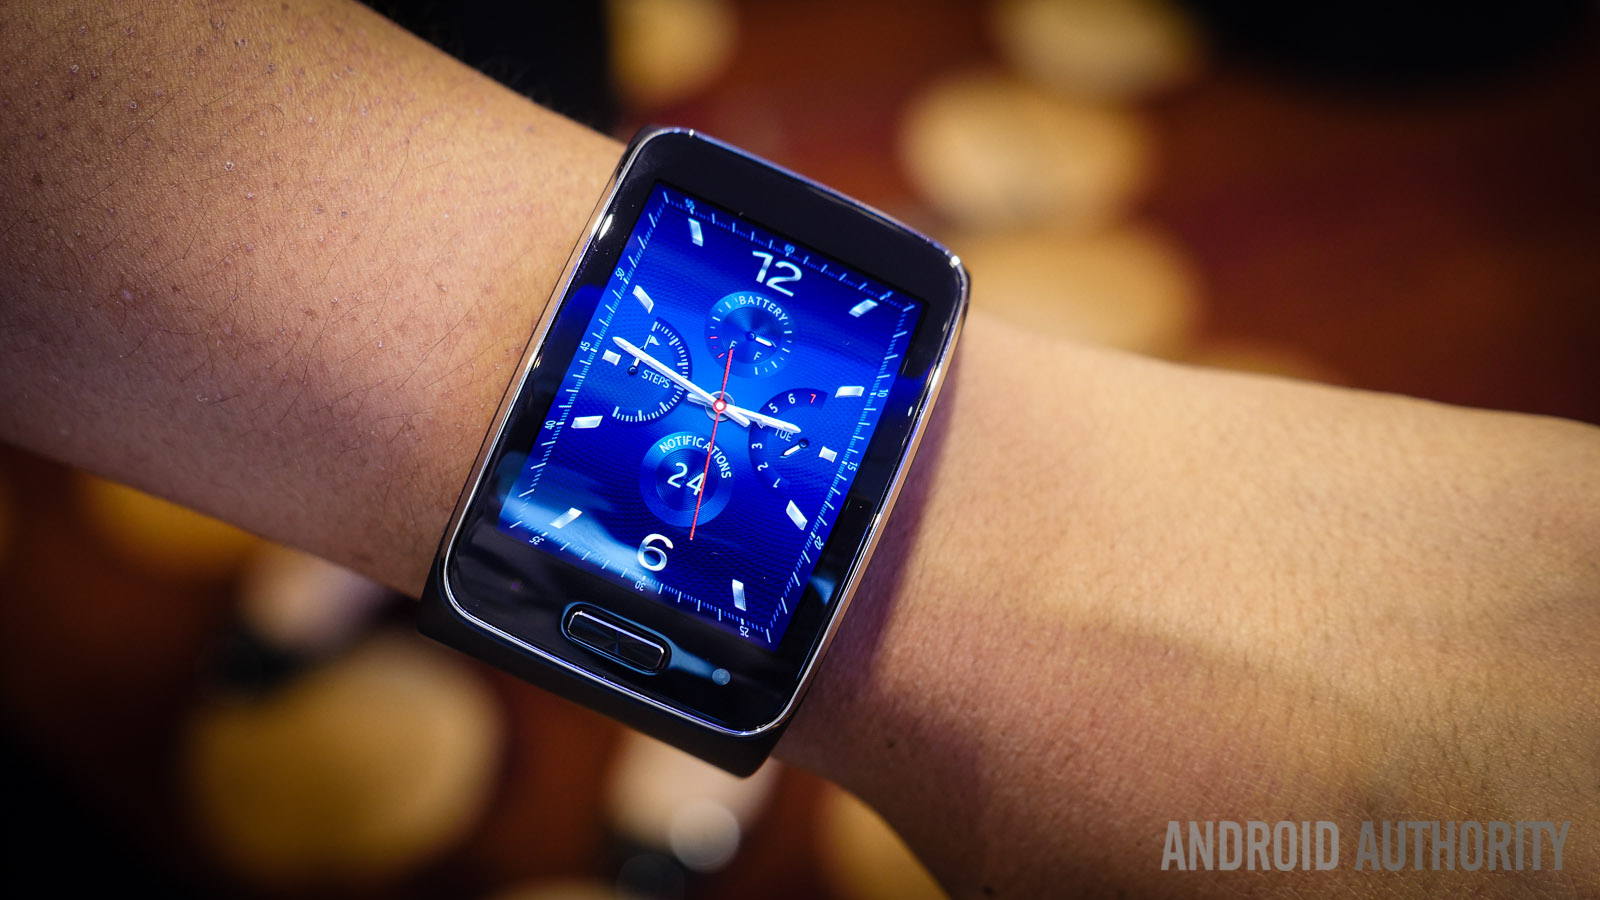 samsung gear s first look aa (4 of 6)